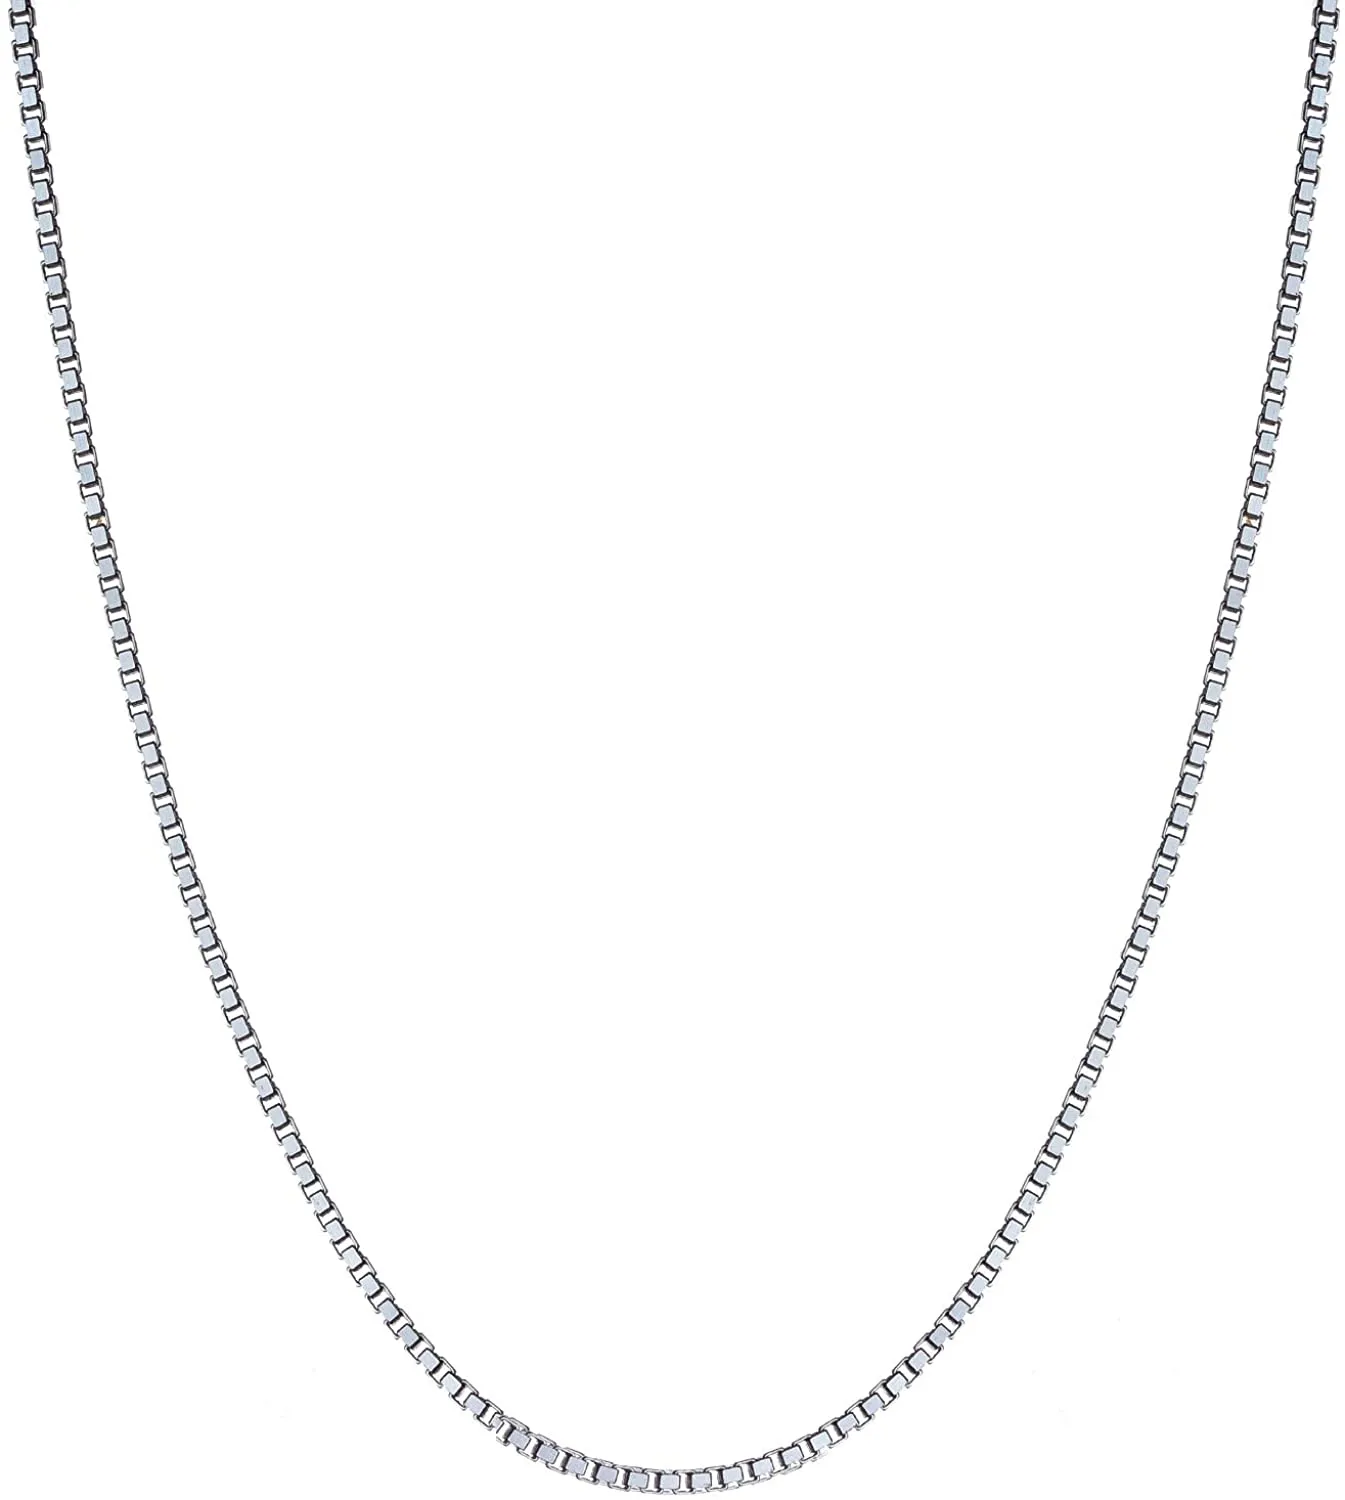 whole 1 4mm 925 sterling silver necklace box link chains jewelry 16 18 20 22 24 26 28 30 8 sizes choose283R